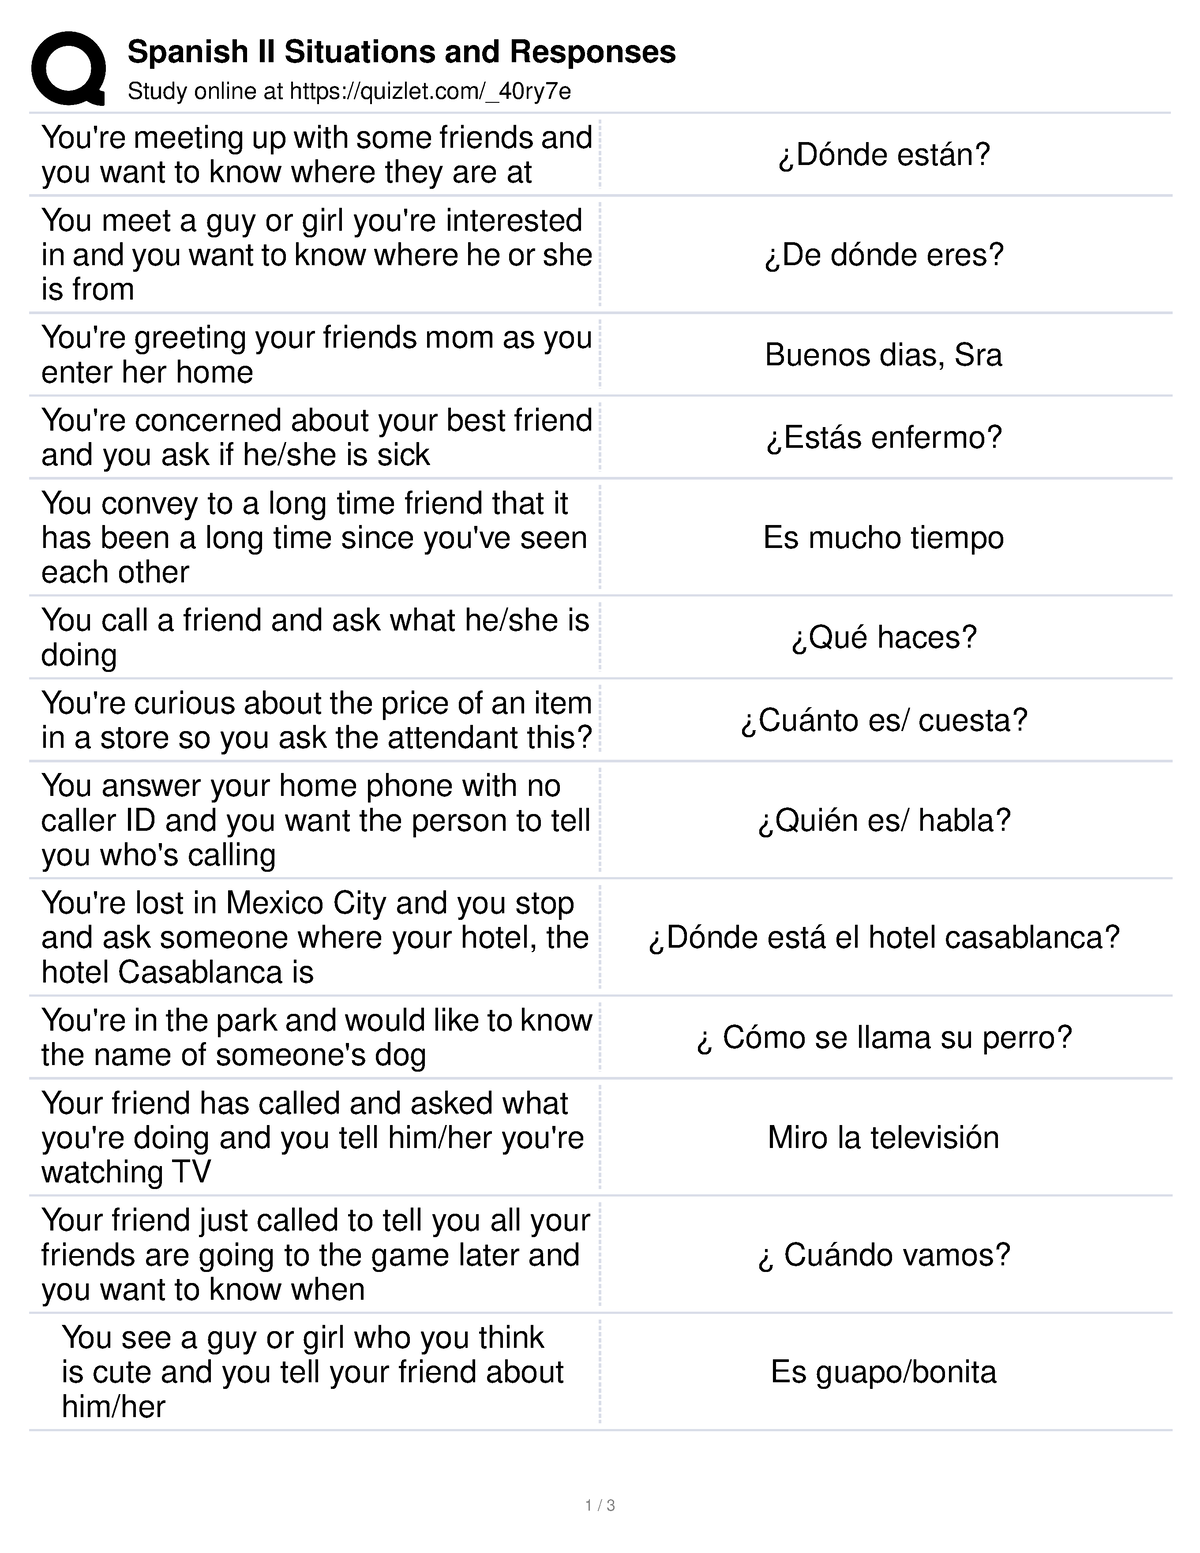 Spanish situations - Spanish II Situations and Responses Study online ...